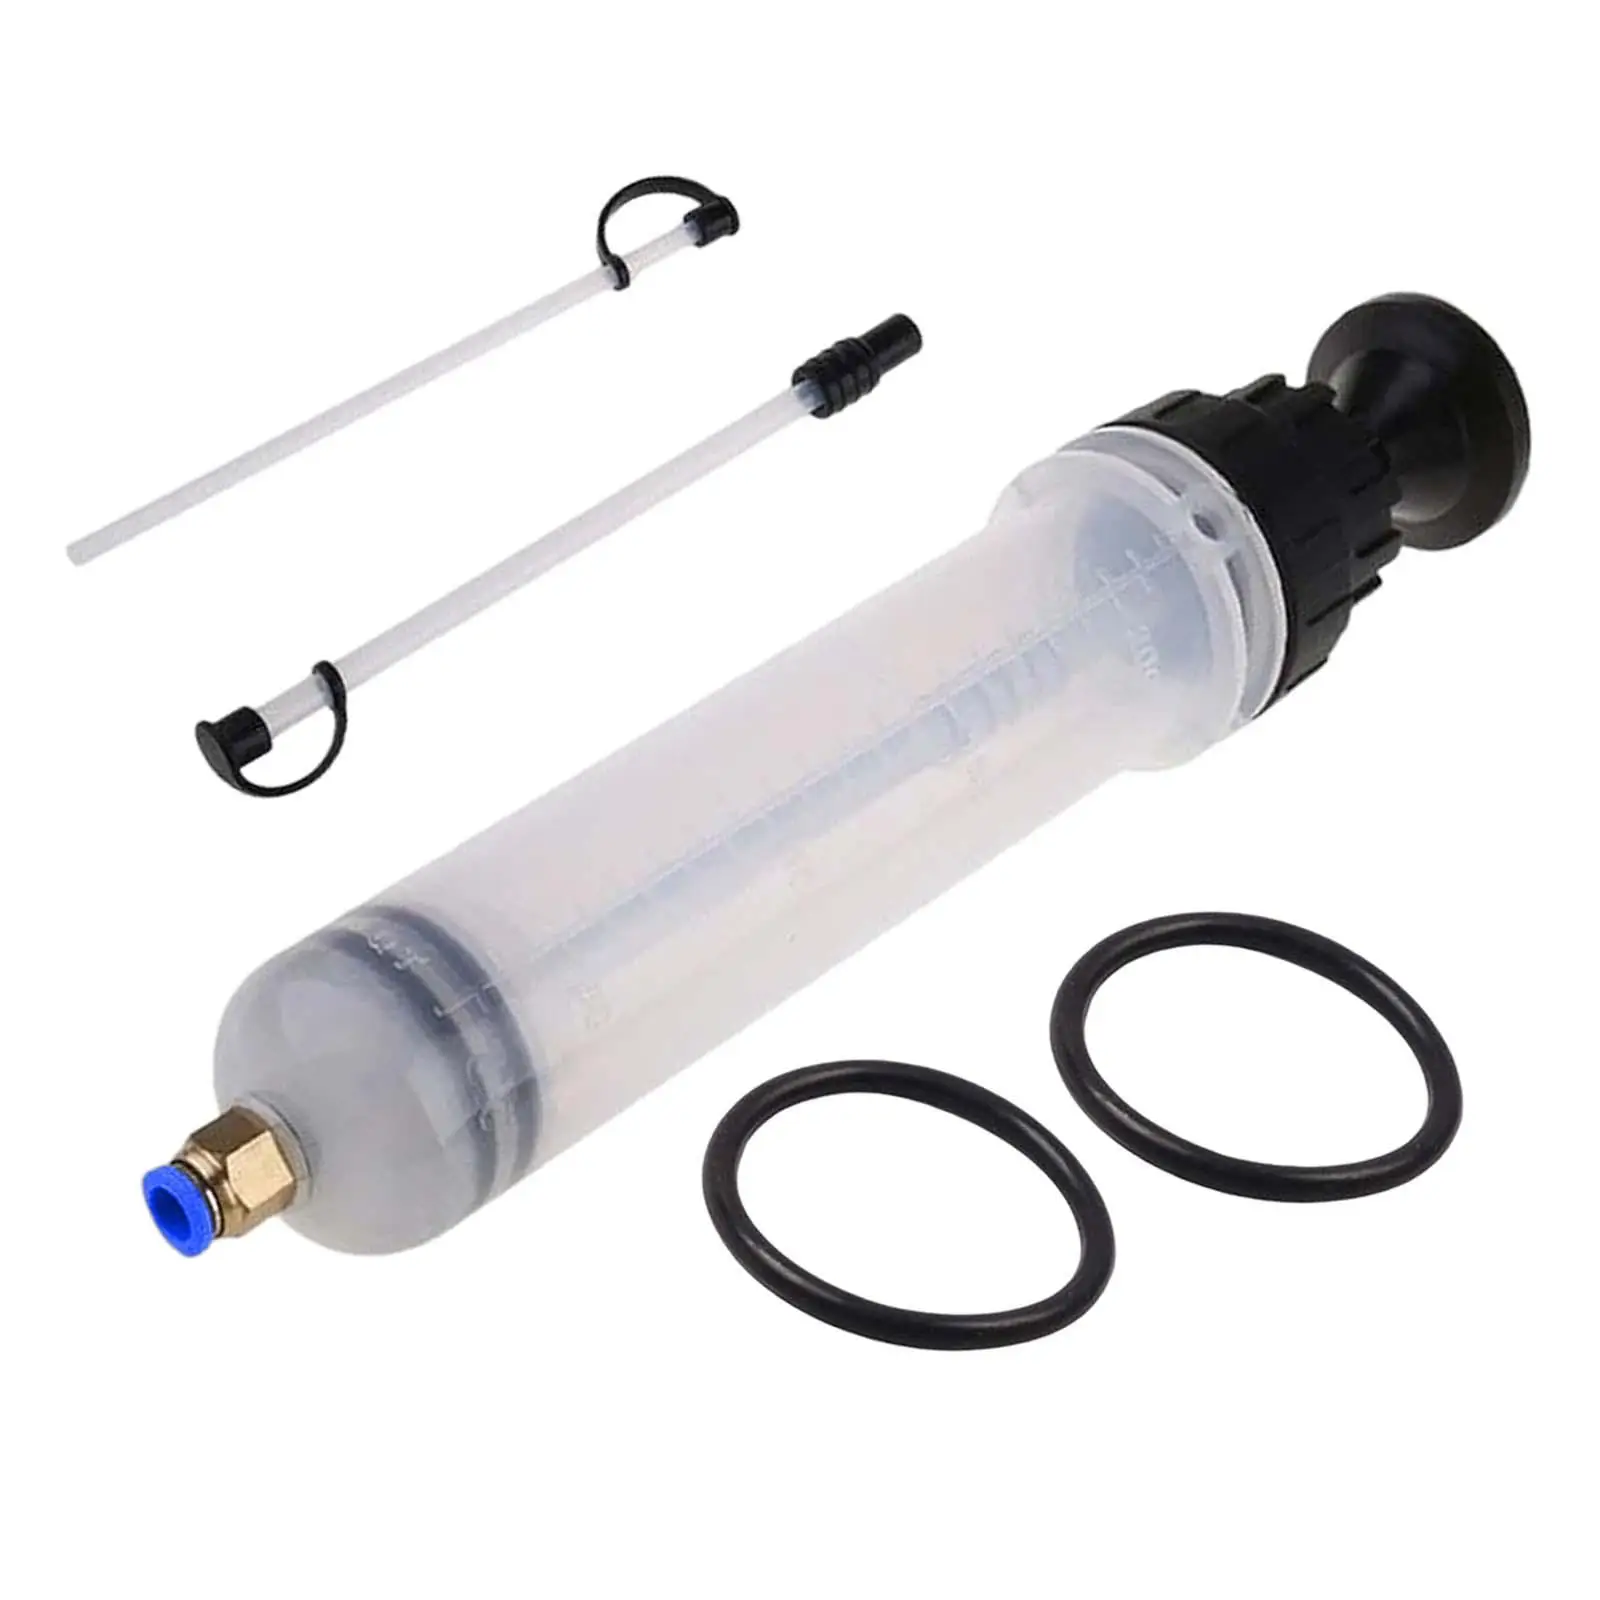 Car Brake Fluid Extractor Fluid Transfer Pump Tool Oil Change 500cc Universal for Car Motorcycle Vehicles RV Boats